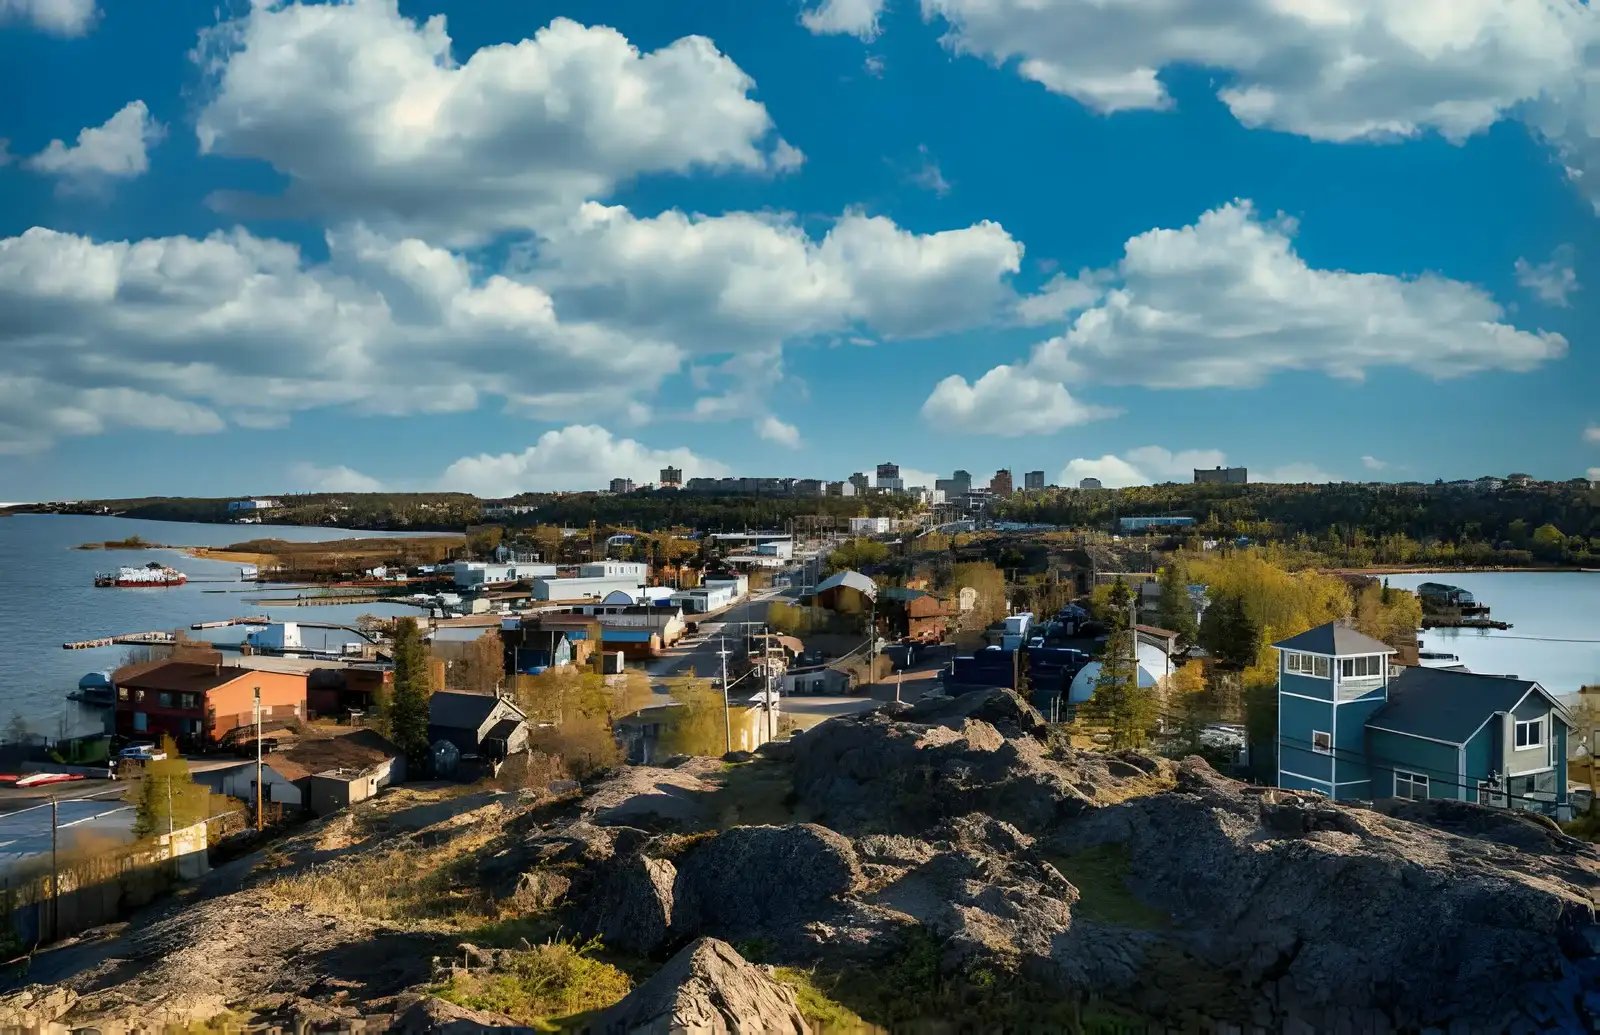 A scenic coastal town with colorful houses, water views, and distant city skyline under a cloudy blue sky.